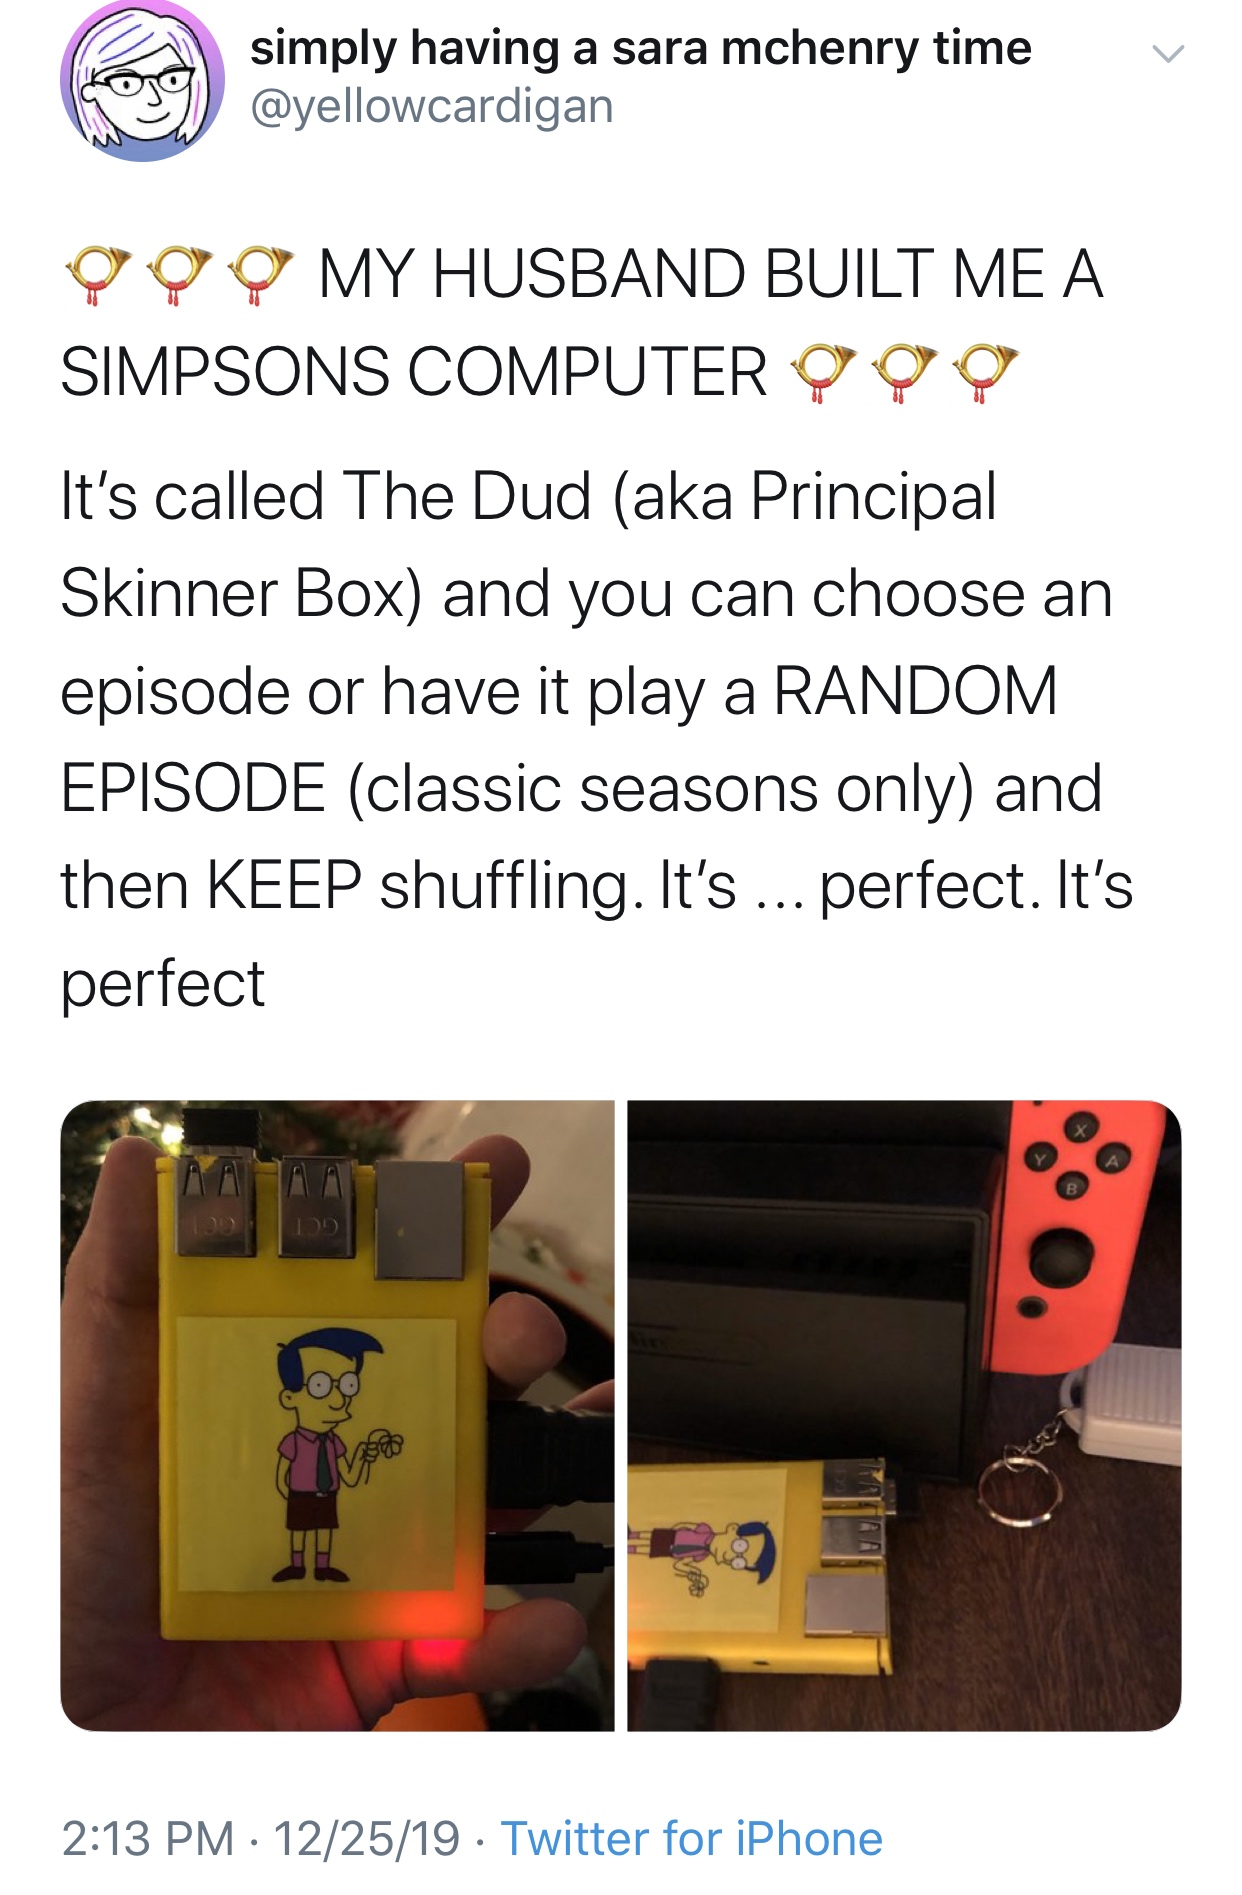 media - simply having a sara mchenry time 999 My Husband Built Me A Simpsons Computer 999 It's called The Dud aka Principal Skinner Box and you can choose an episode or have it play a Random Episode classic seasons only and then Keep shuffling. It's ... p